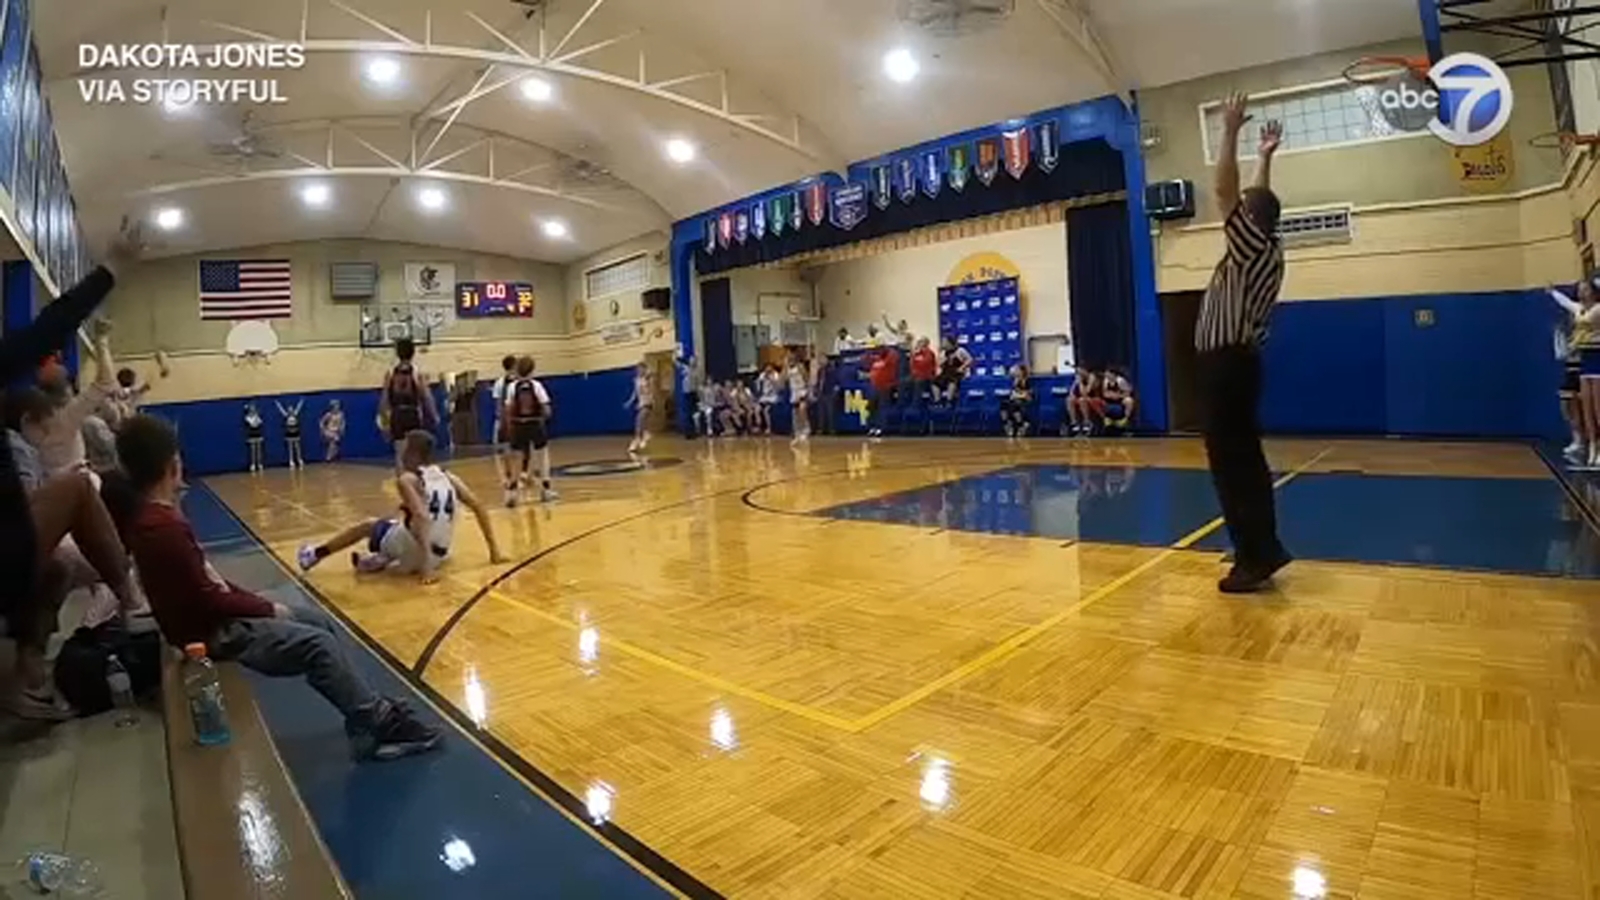   
																Illinois 8th grader makes near full-court buzzer beater shot during basketball game | VIDEO 
															 